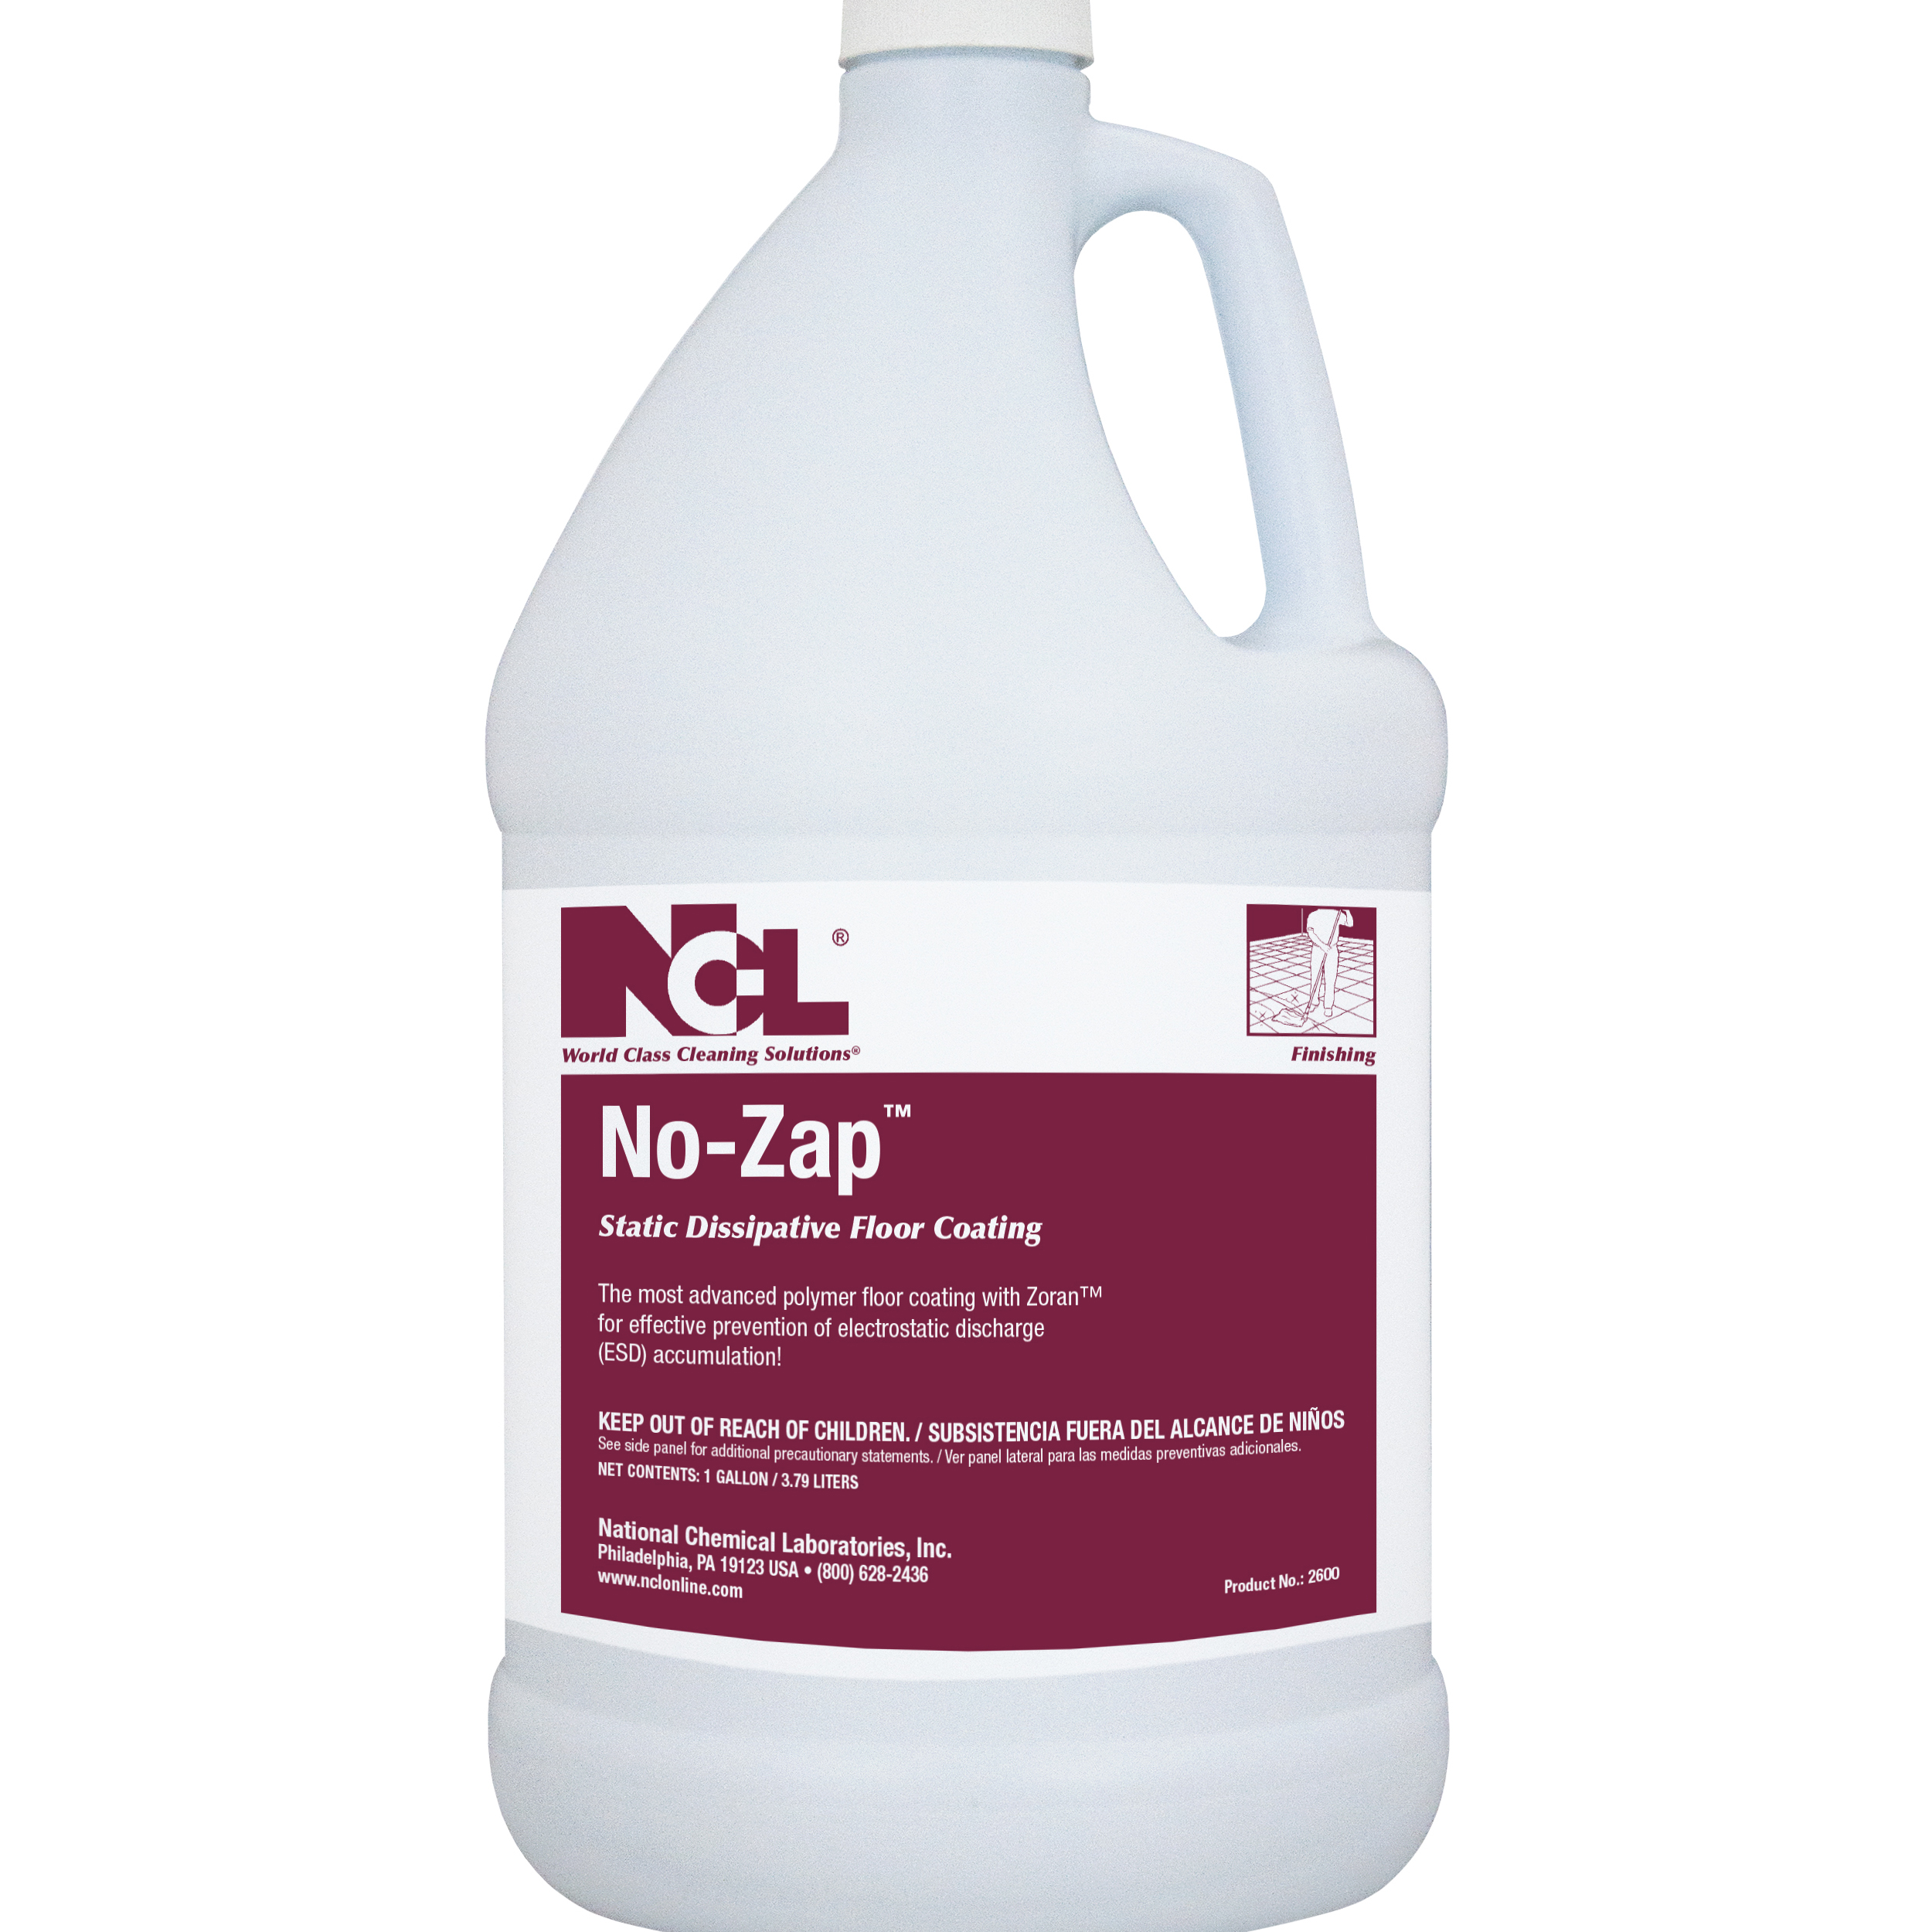  NO-ZAP Static Dissipative Floor Coating 4/1 Gal. Case (NCL2600-29) 